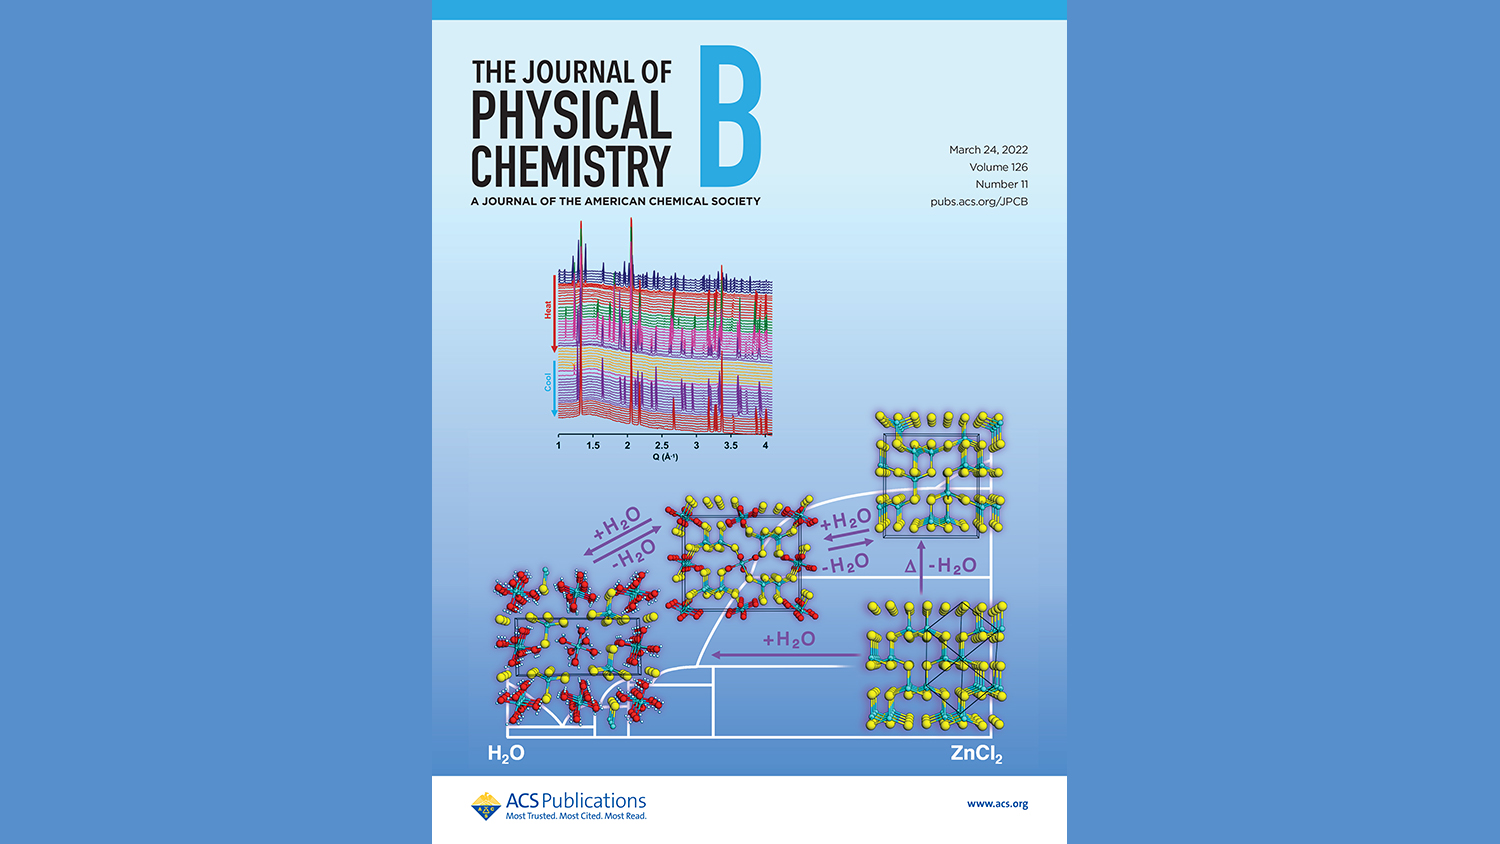 A Physical Chemistry journal cover by James Martin and his group of researchers